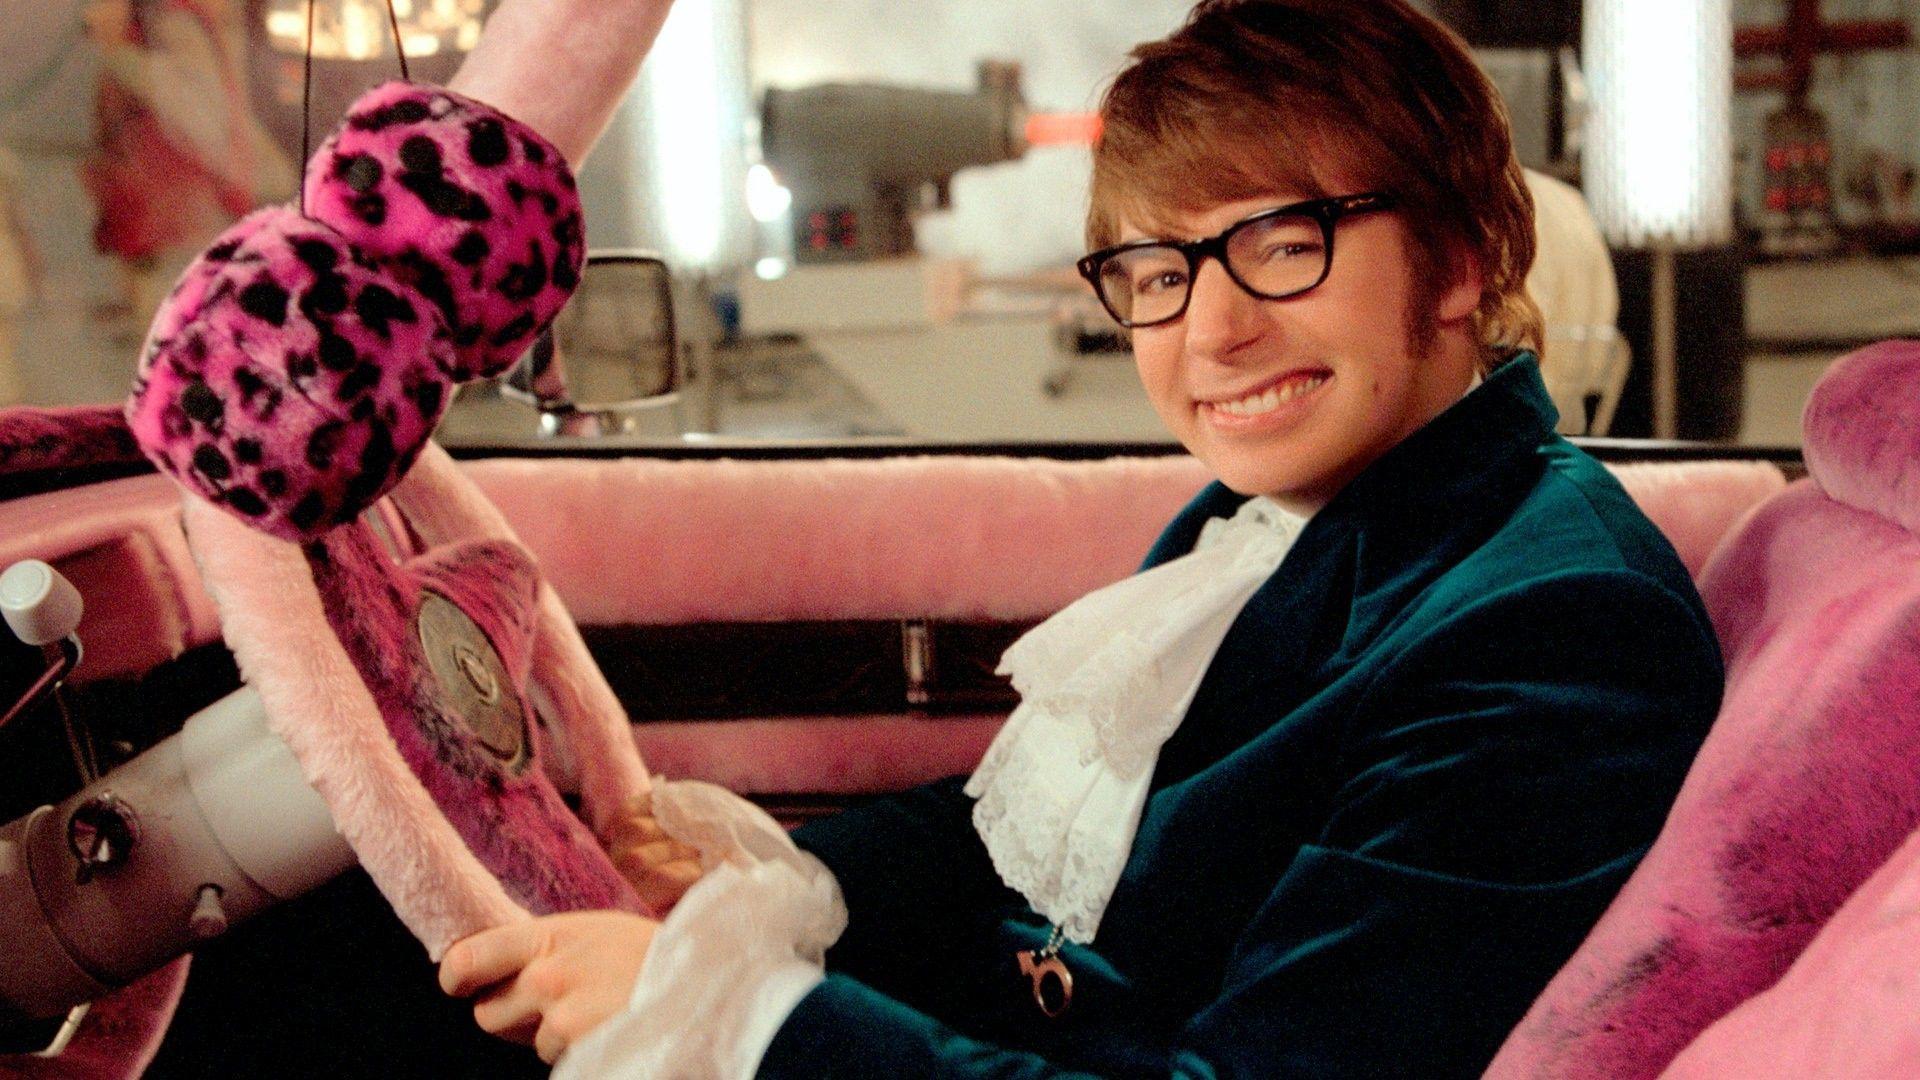 Austin Powers smirks as he sits at the wheel of a pink car